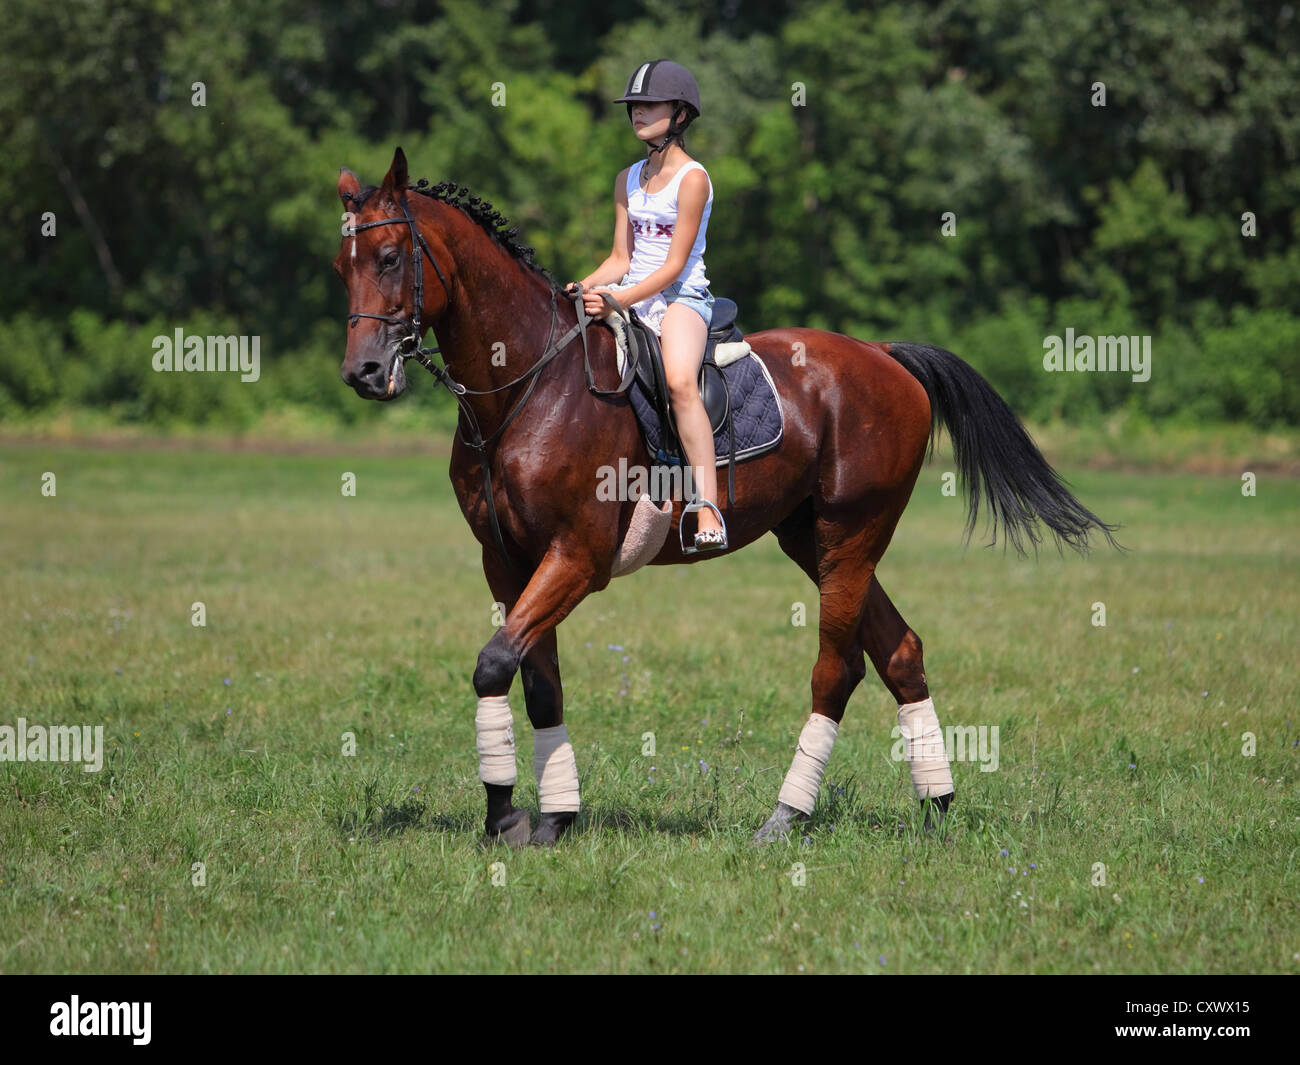 Young equestrian riding her horse Stock Photo